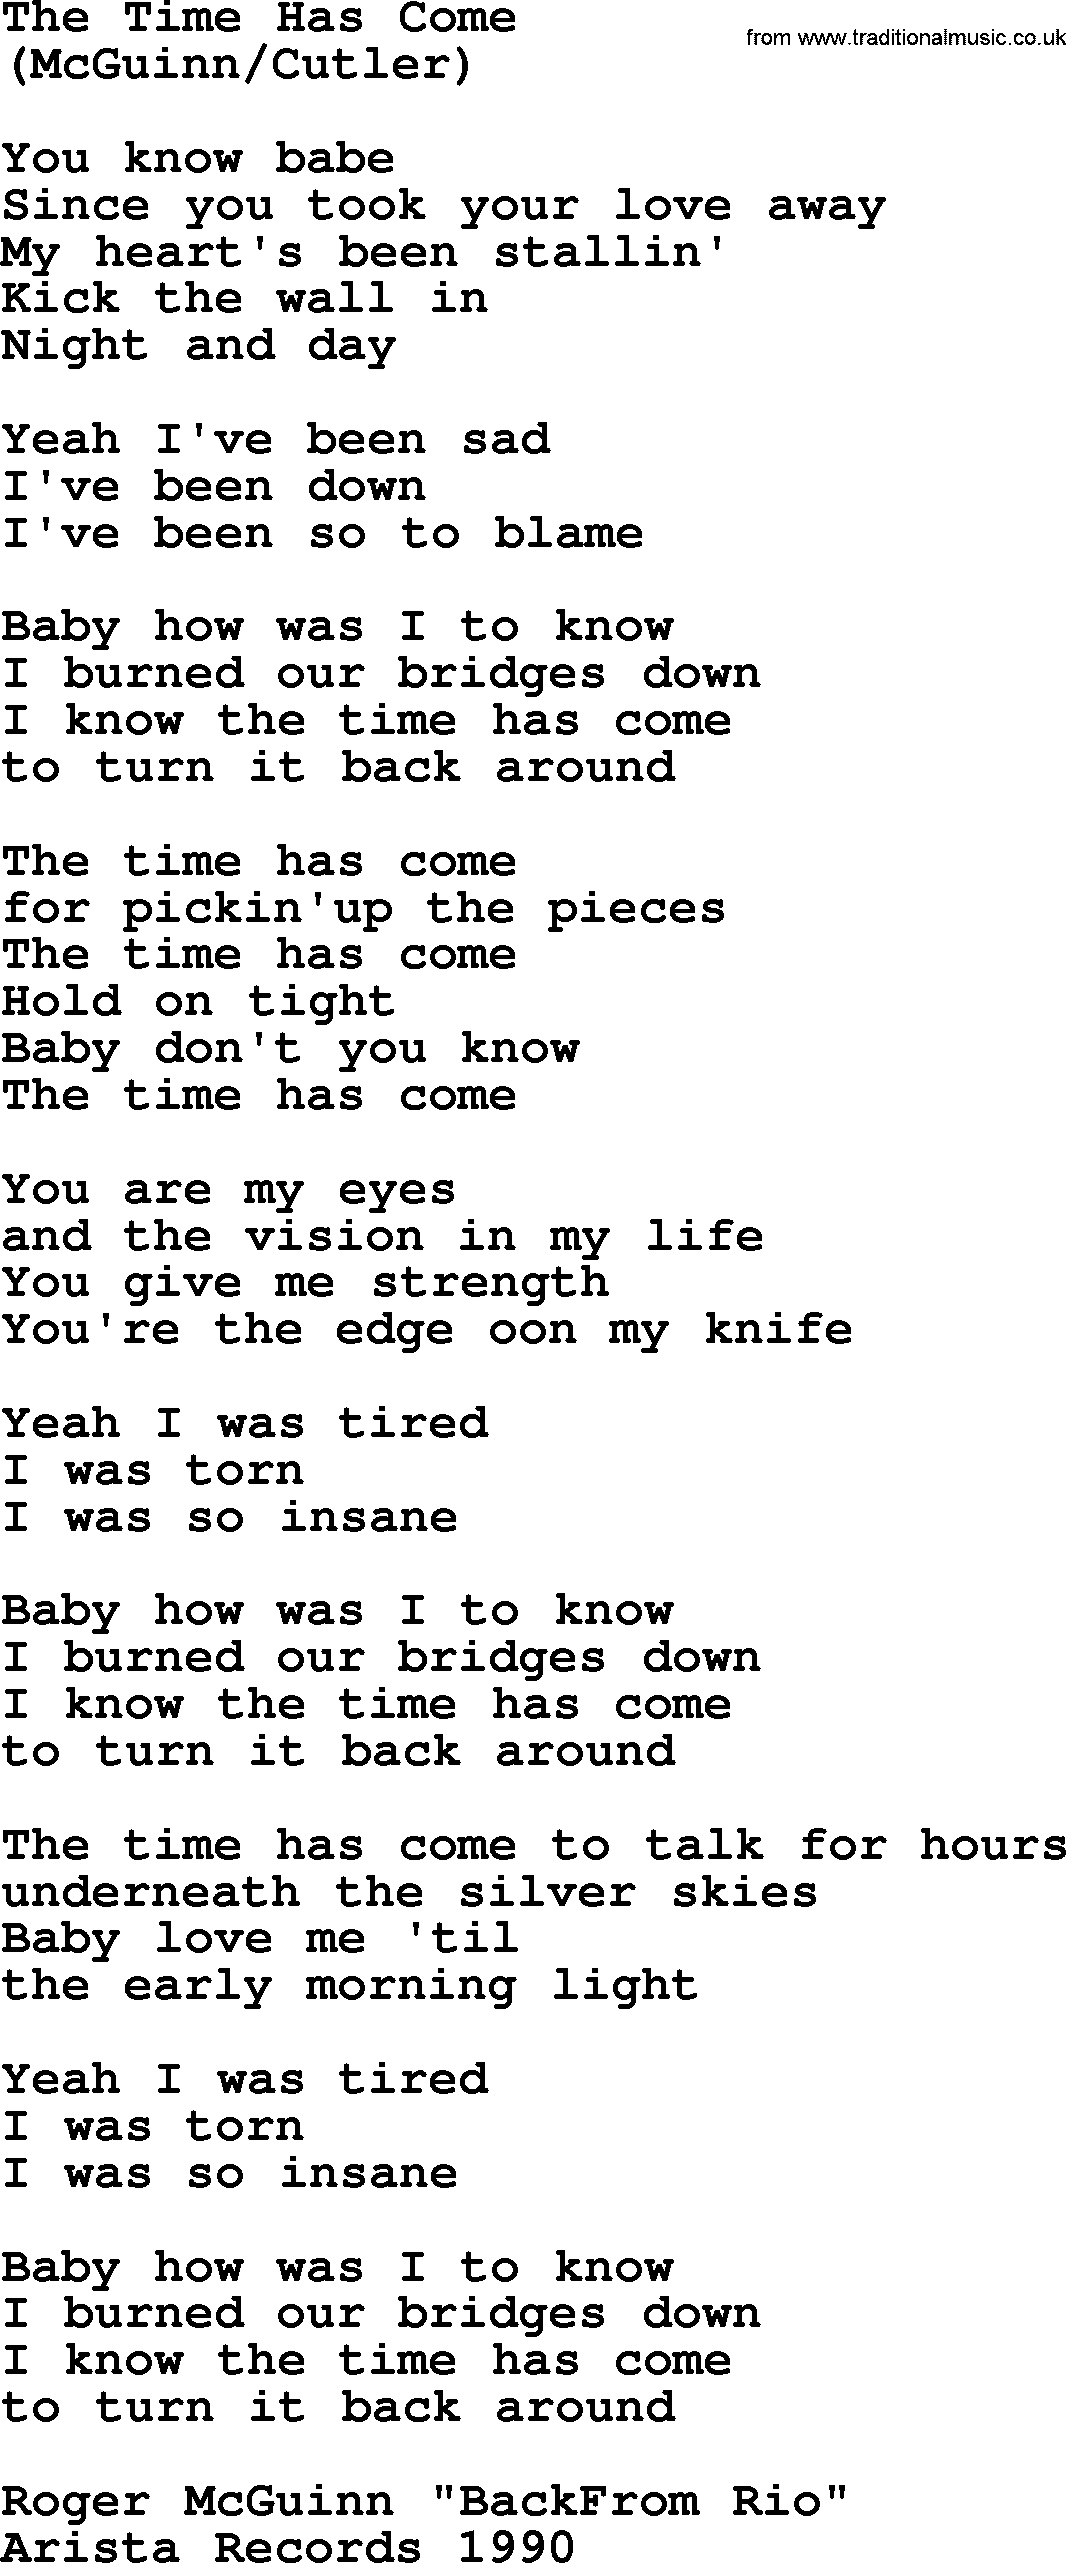 The Byrds song The Time Has Come, lyrics